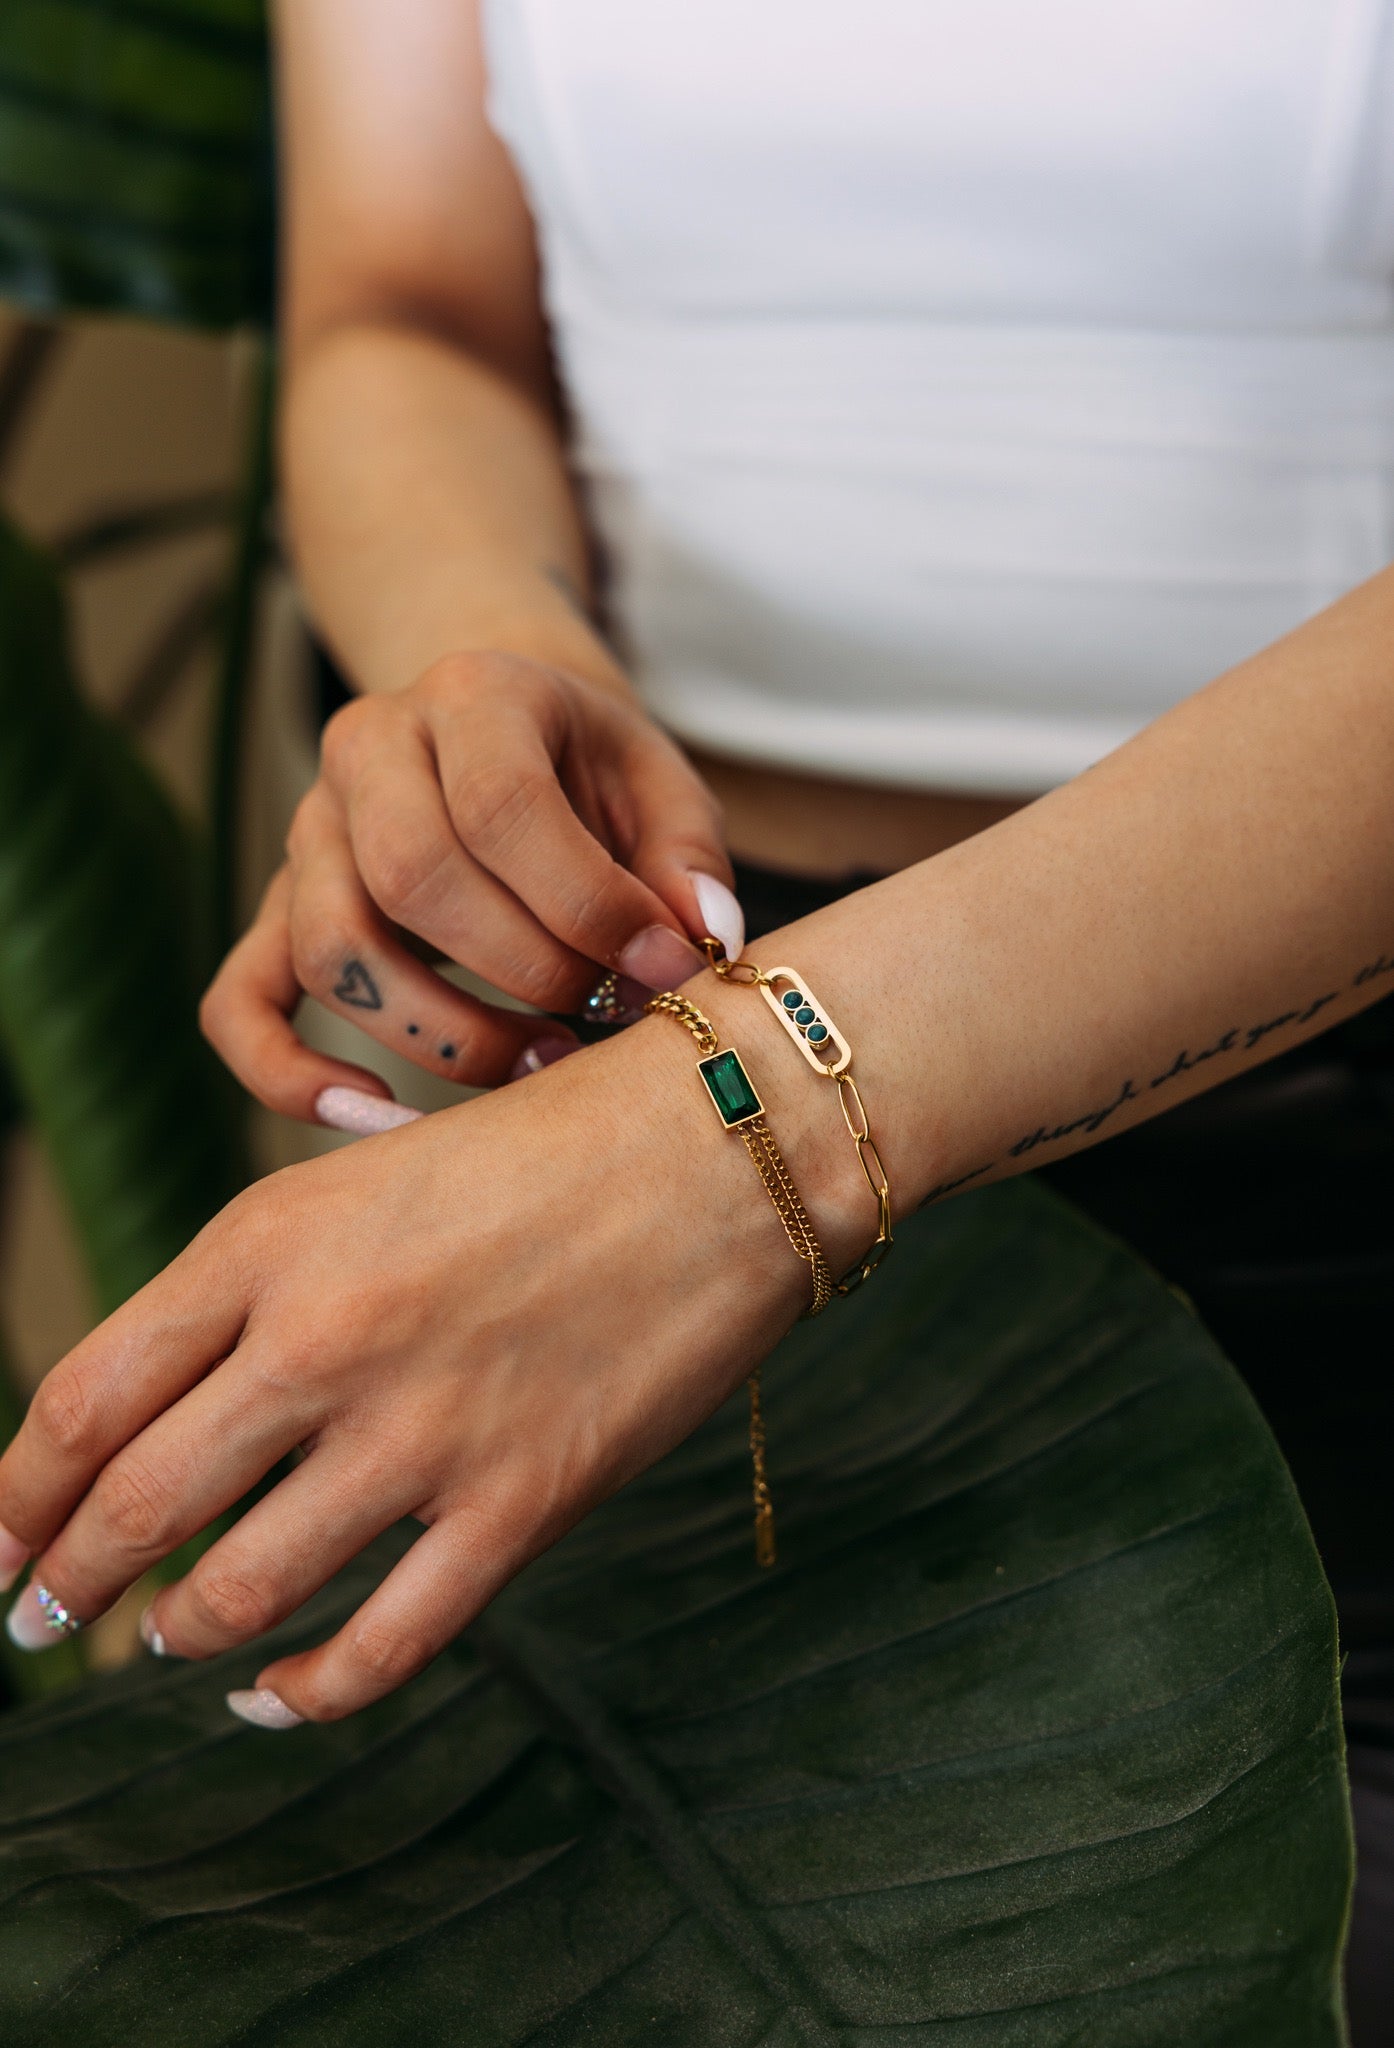 Encanto Gold Bracelets - Enchantment and allure, a piece with a captivatingly irresistible quality. An aesthetically sophisticated and visually pleasing bracelet able to entice any onlooker.  Item Detail: 18K Gold Plated Stainless Steel Natural Stone Thick Bracelet